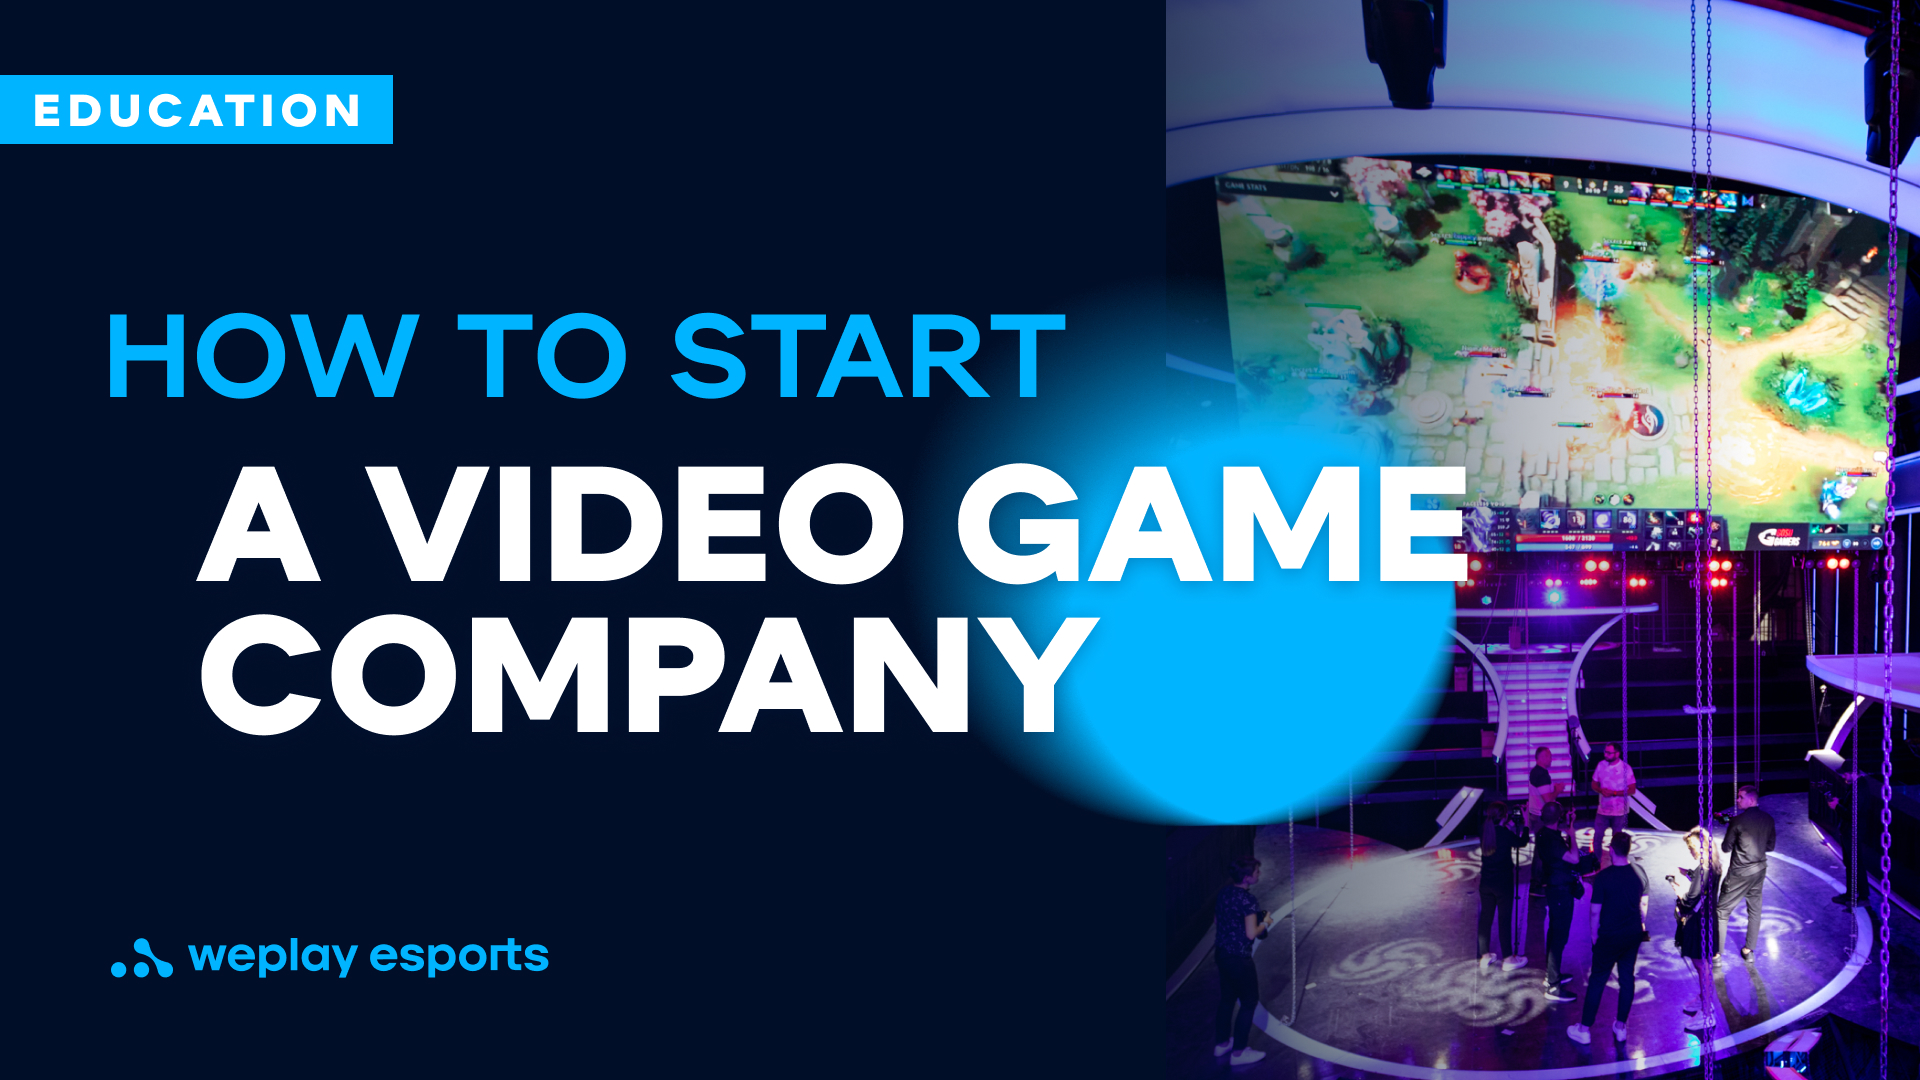 How to Start a Video Game Company